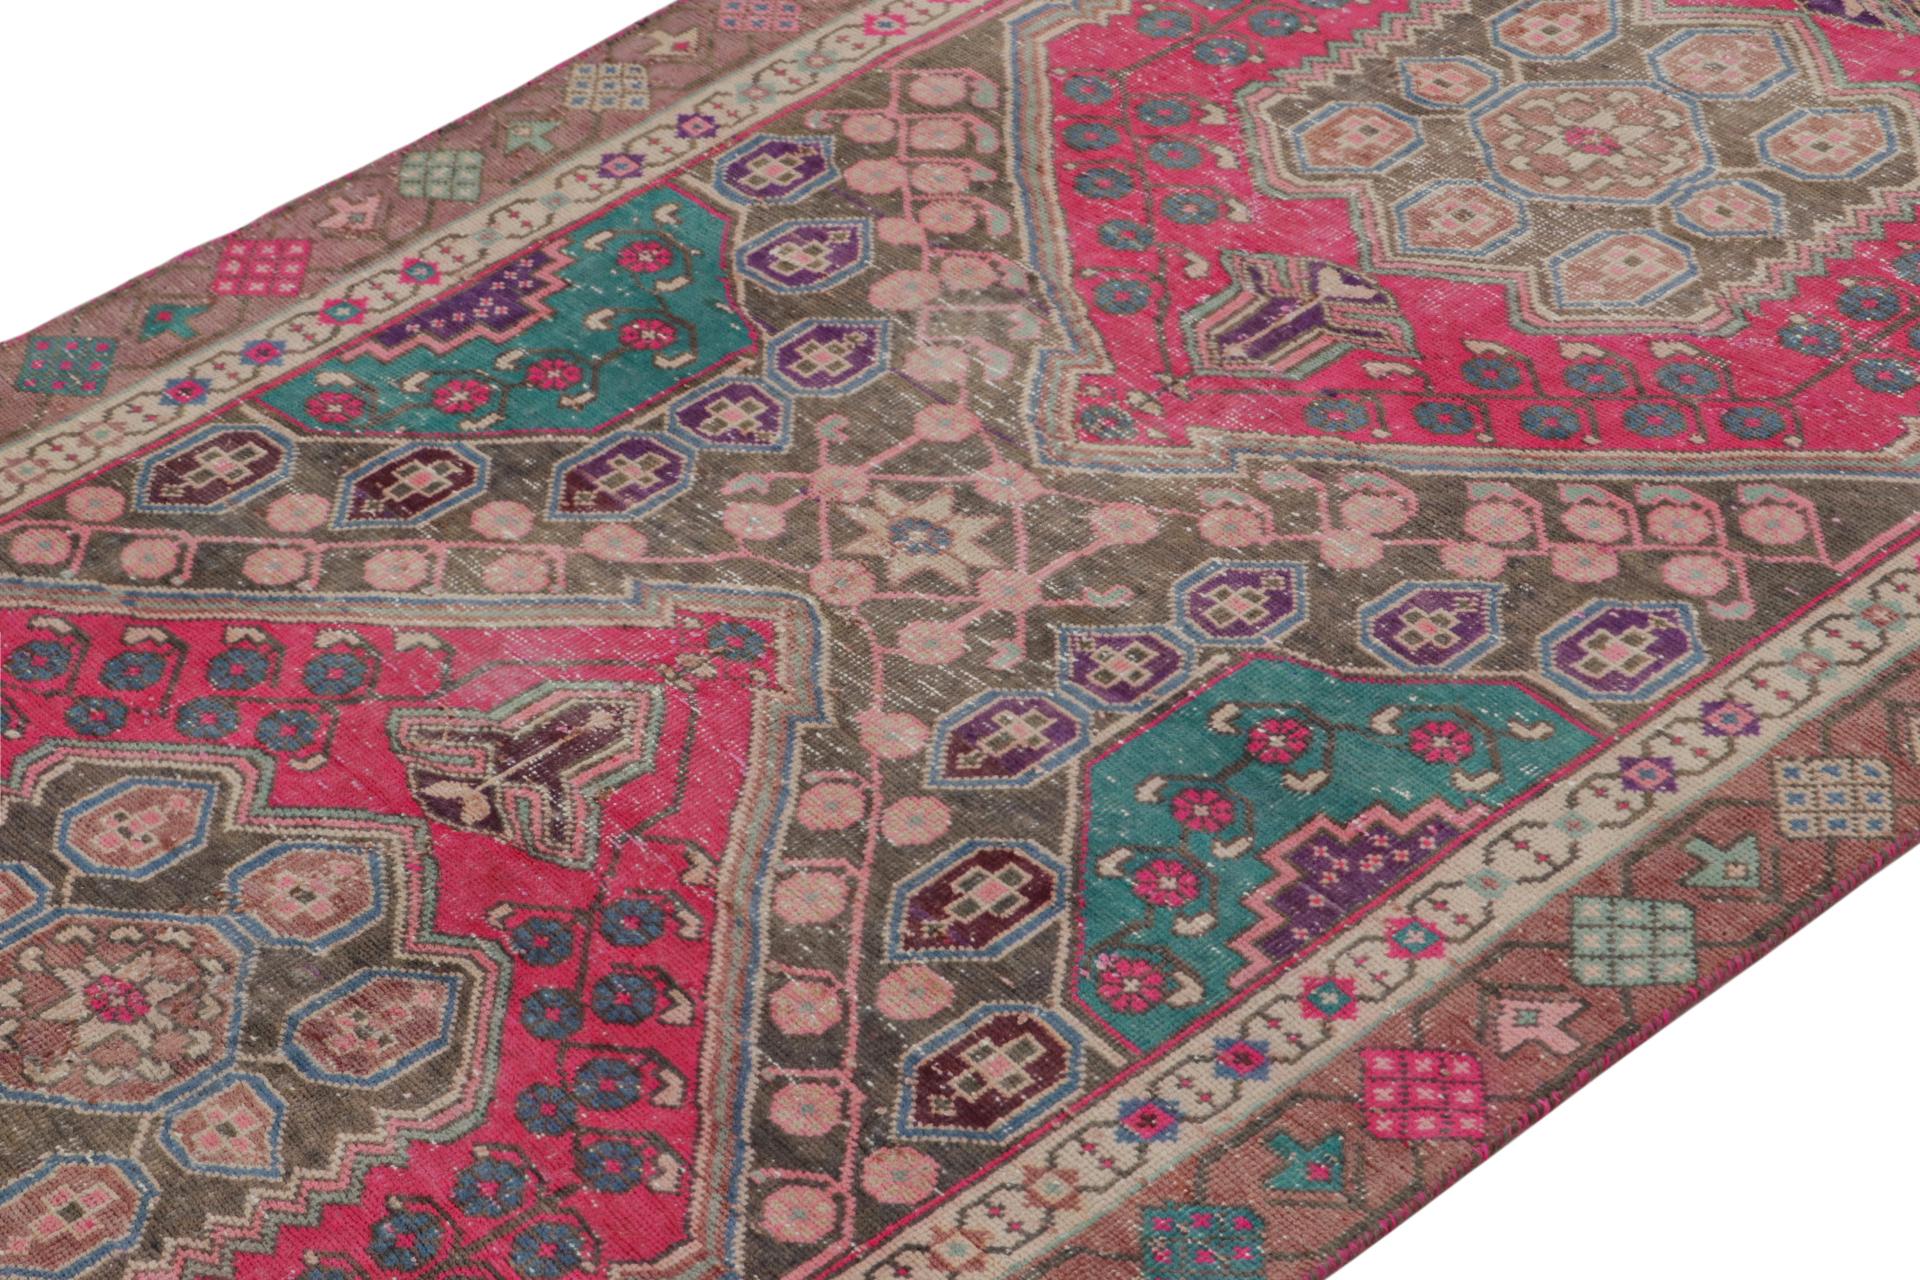 Hand-Knotted Vintage Persian Shiraz rug in Pink and Teal Floral Patterns by Rug & Kilim For Sale